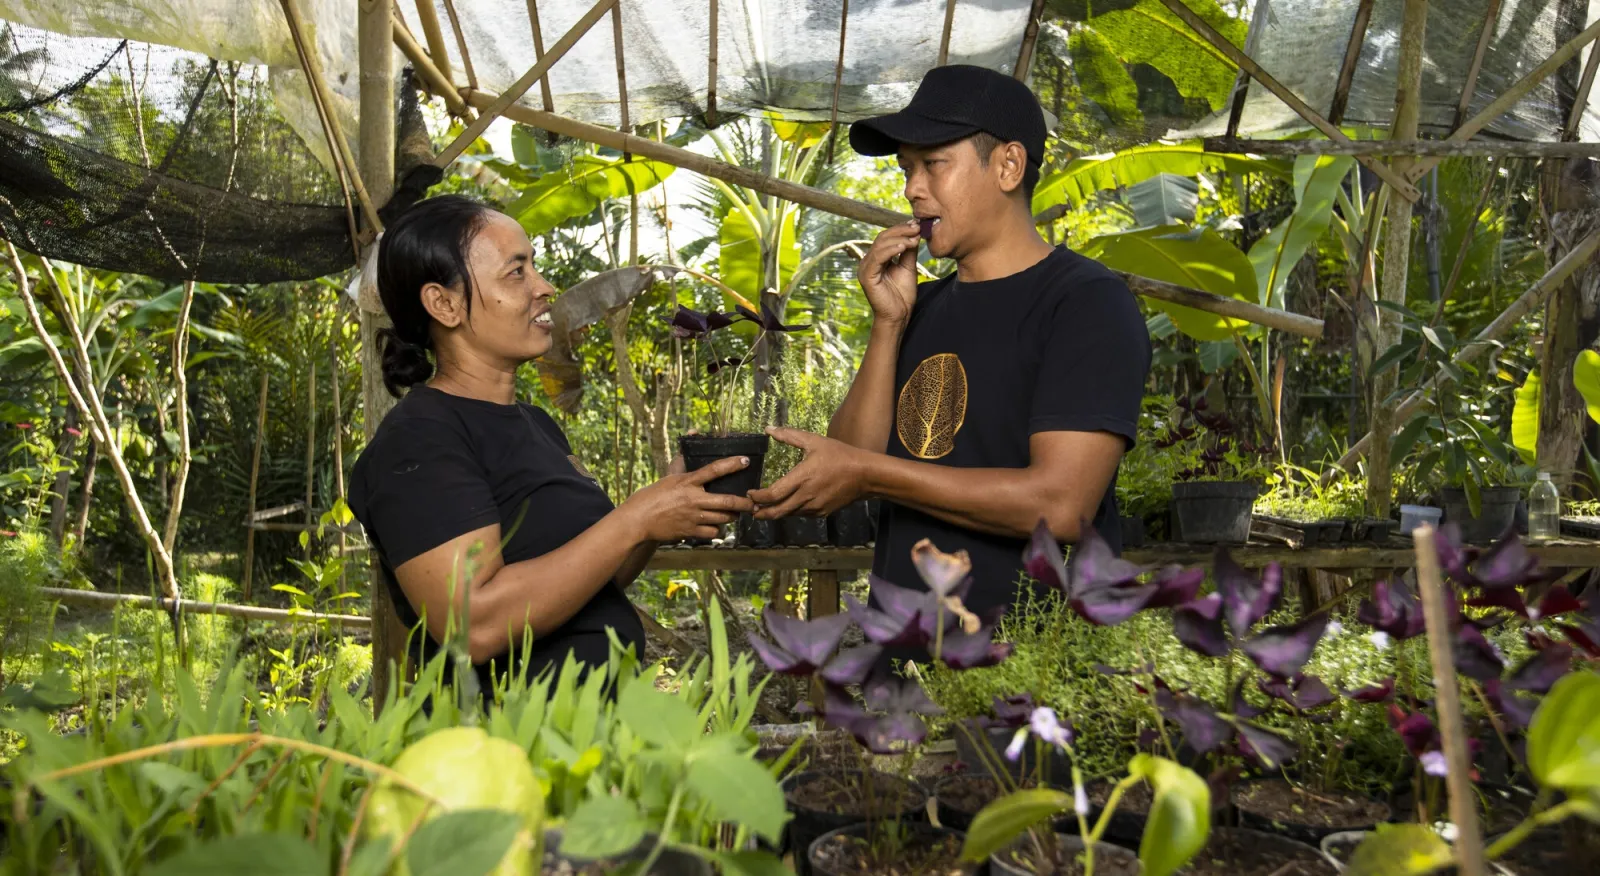 A man and a woman in Emas Hitam's garden in Indonesia. They are surrounded by lush plants, and smiling at each other.